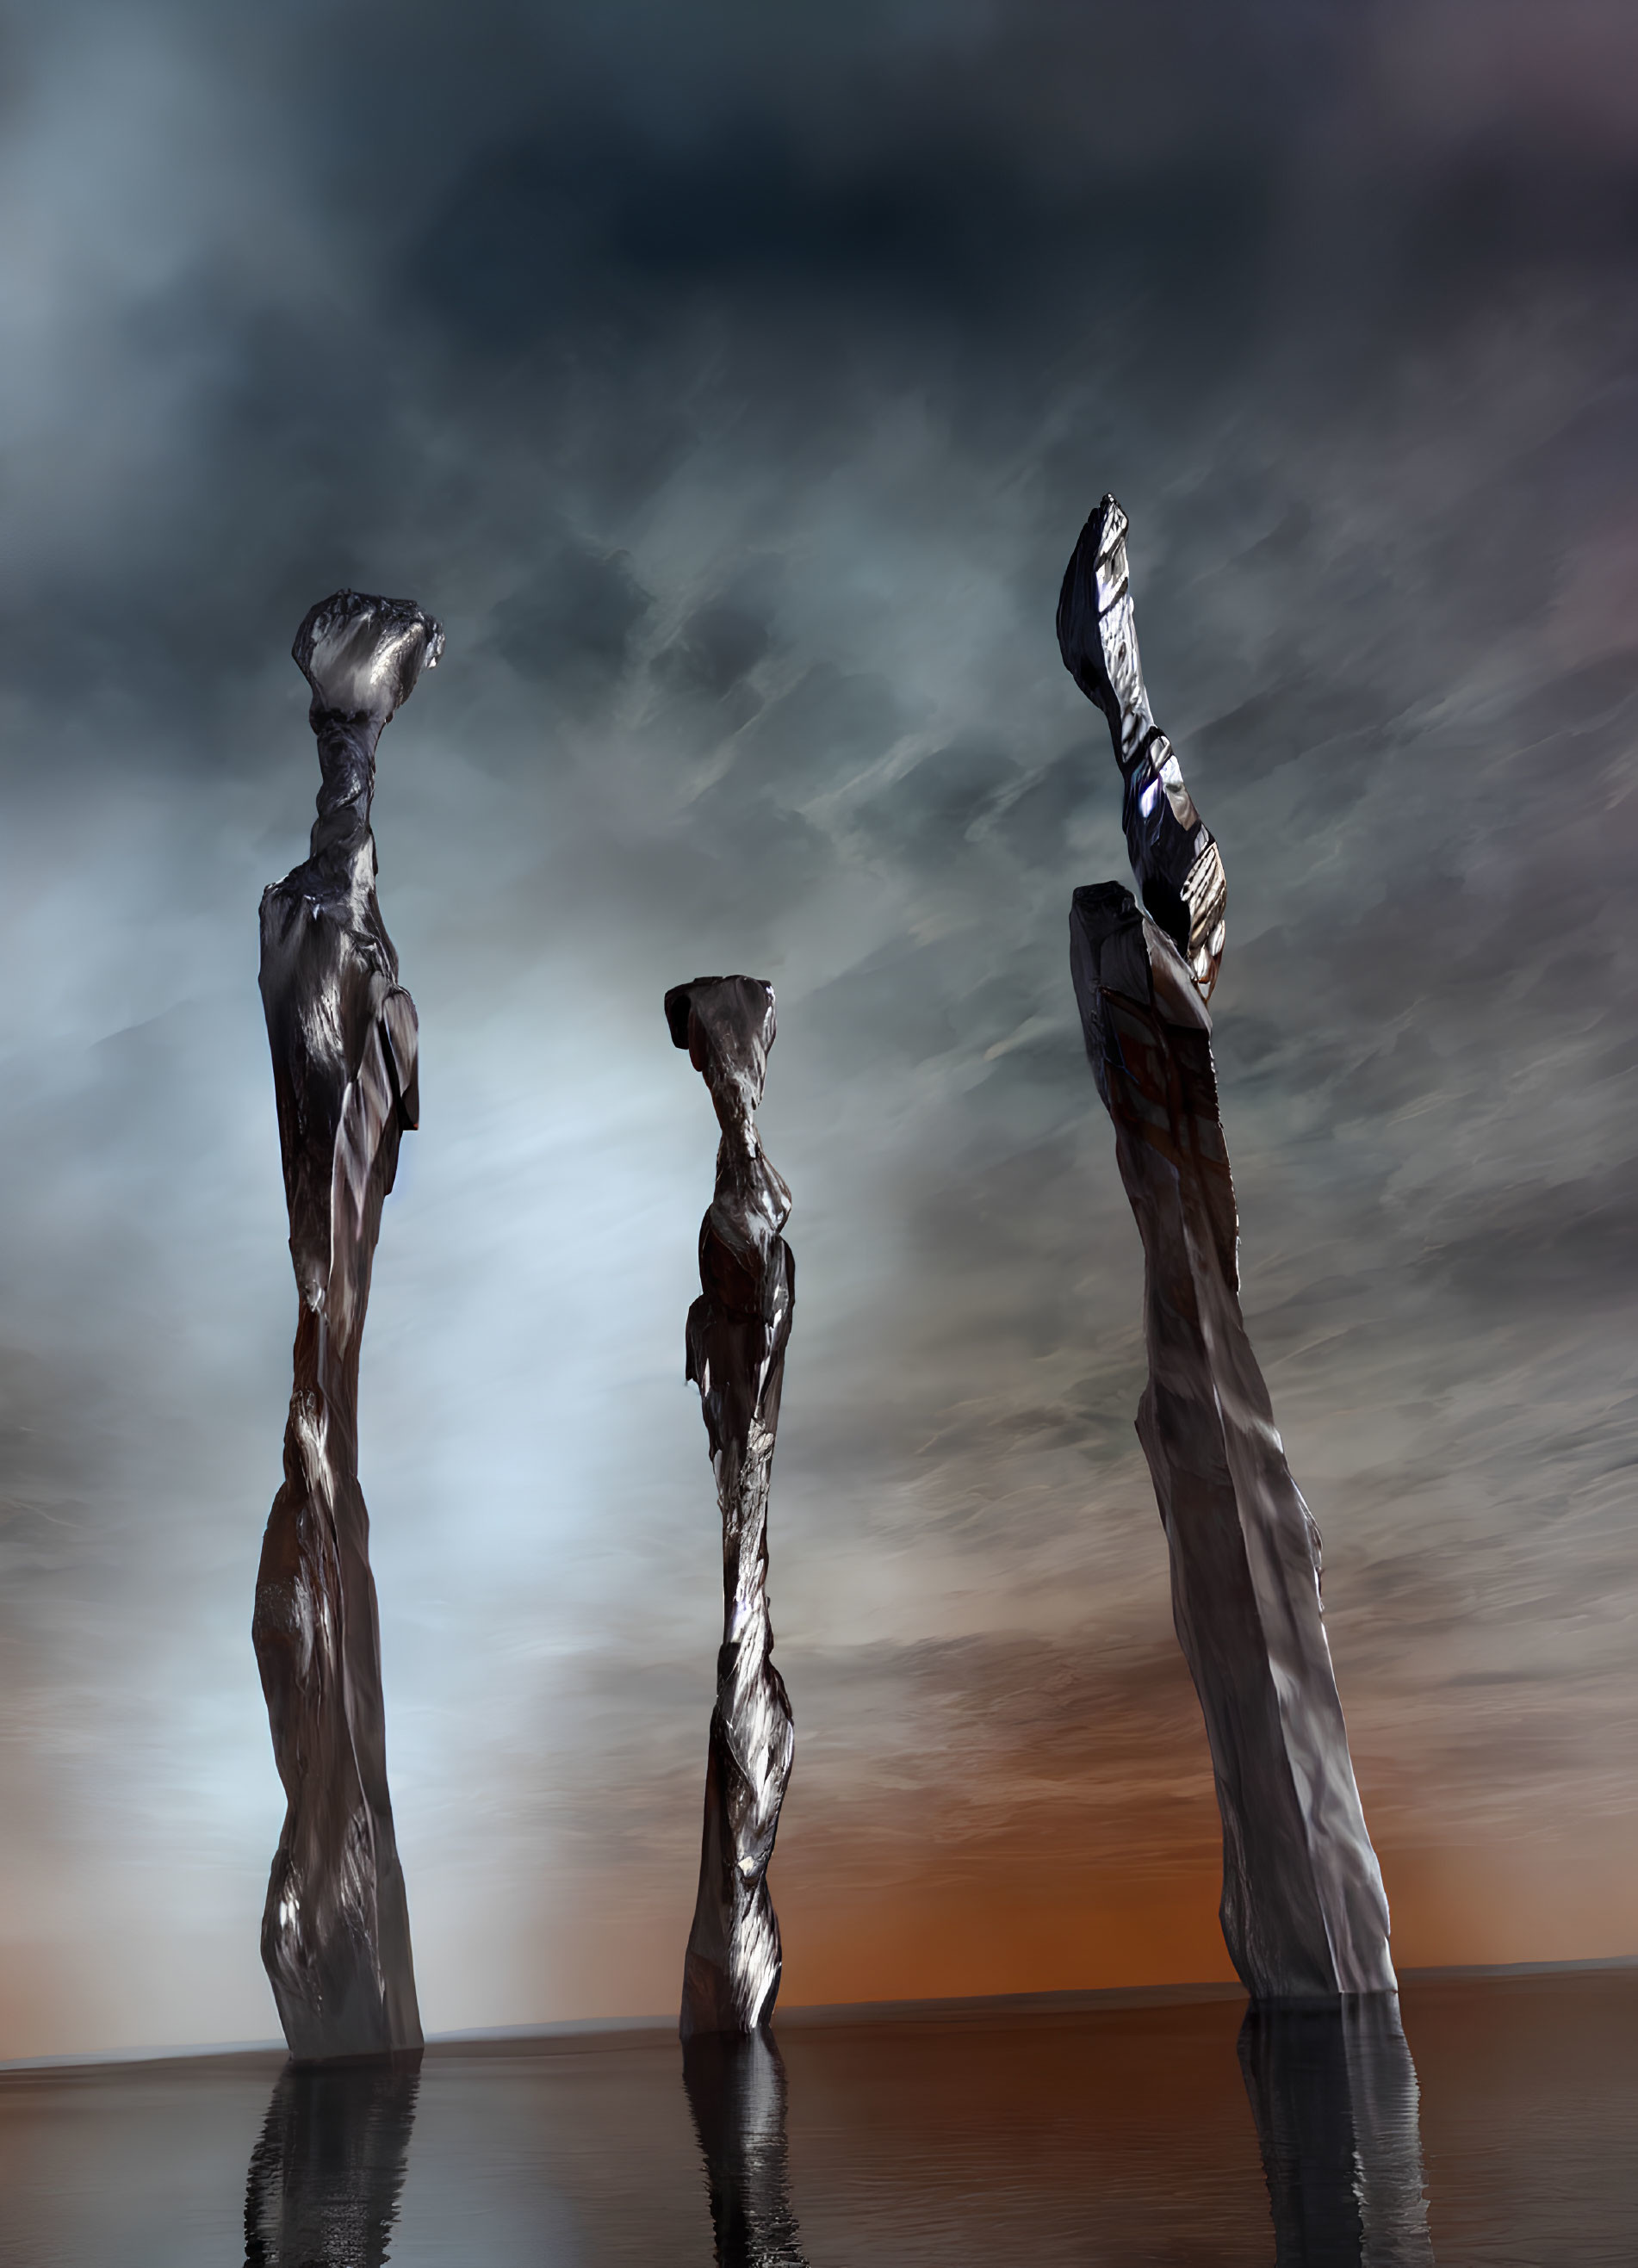 Twisted metallic sculptures in calm water under dramatic sky